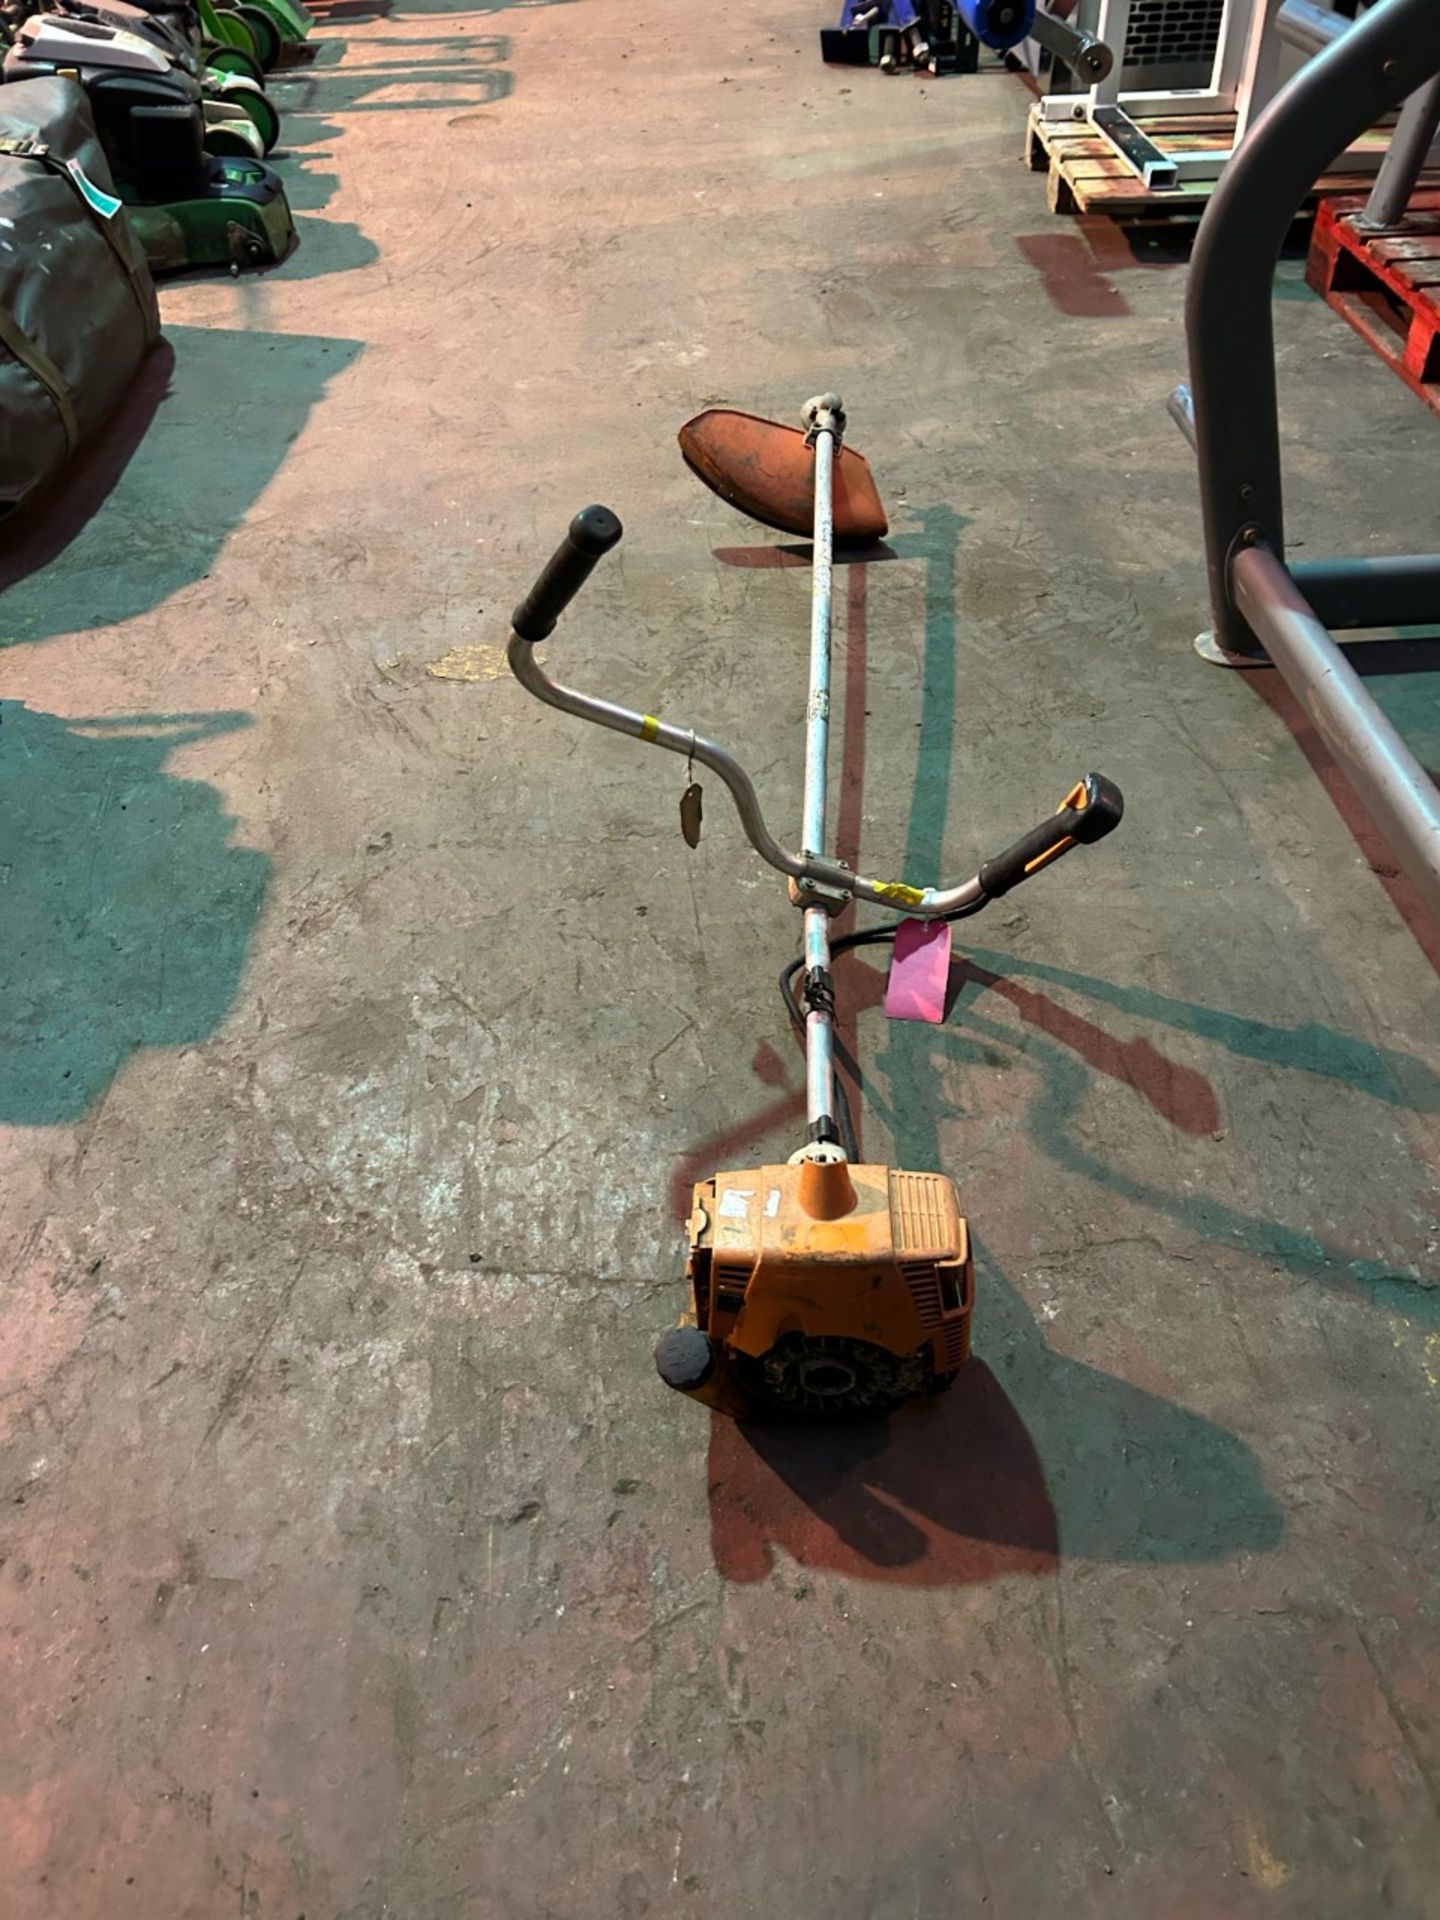 Stihl fs300 non runner. Parts only